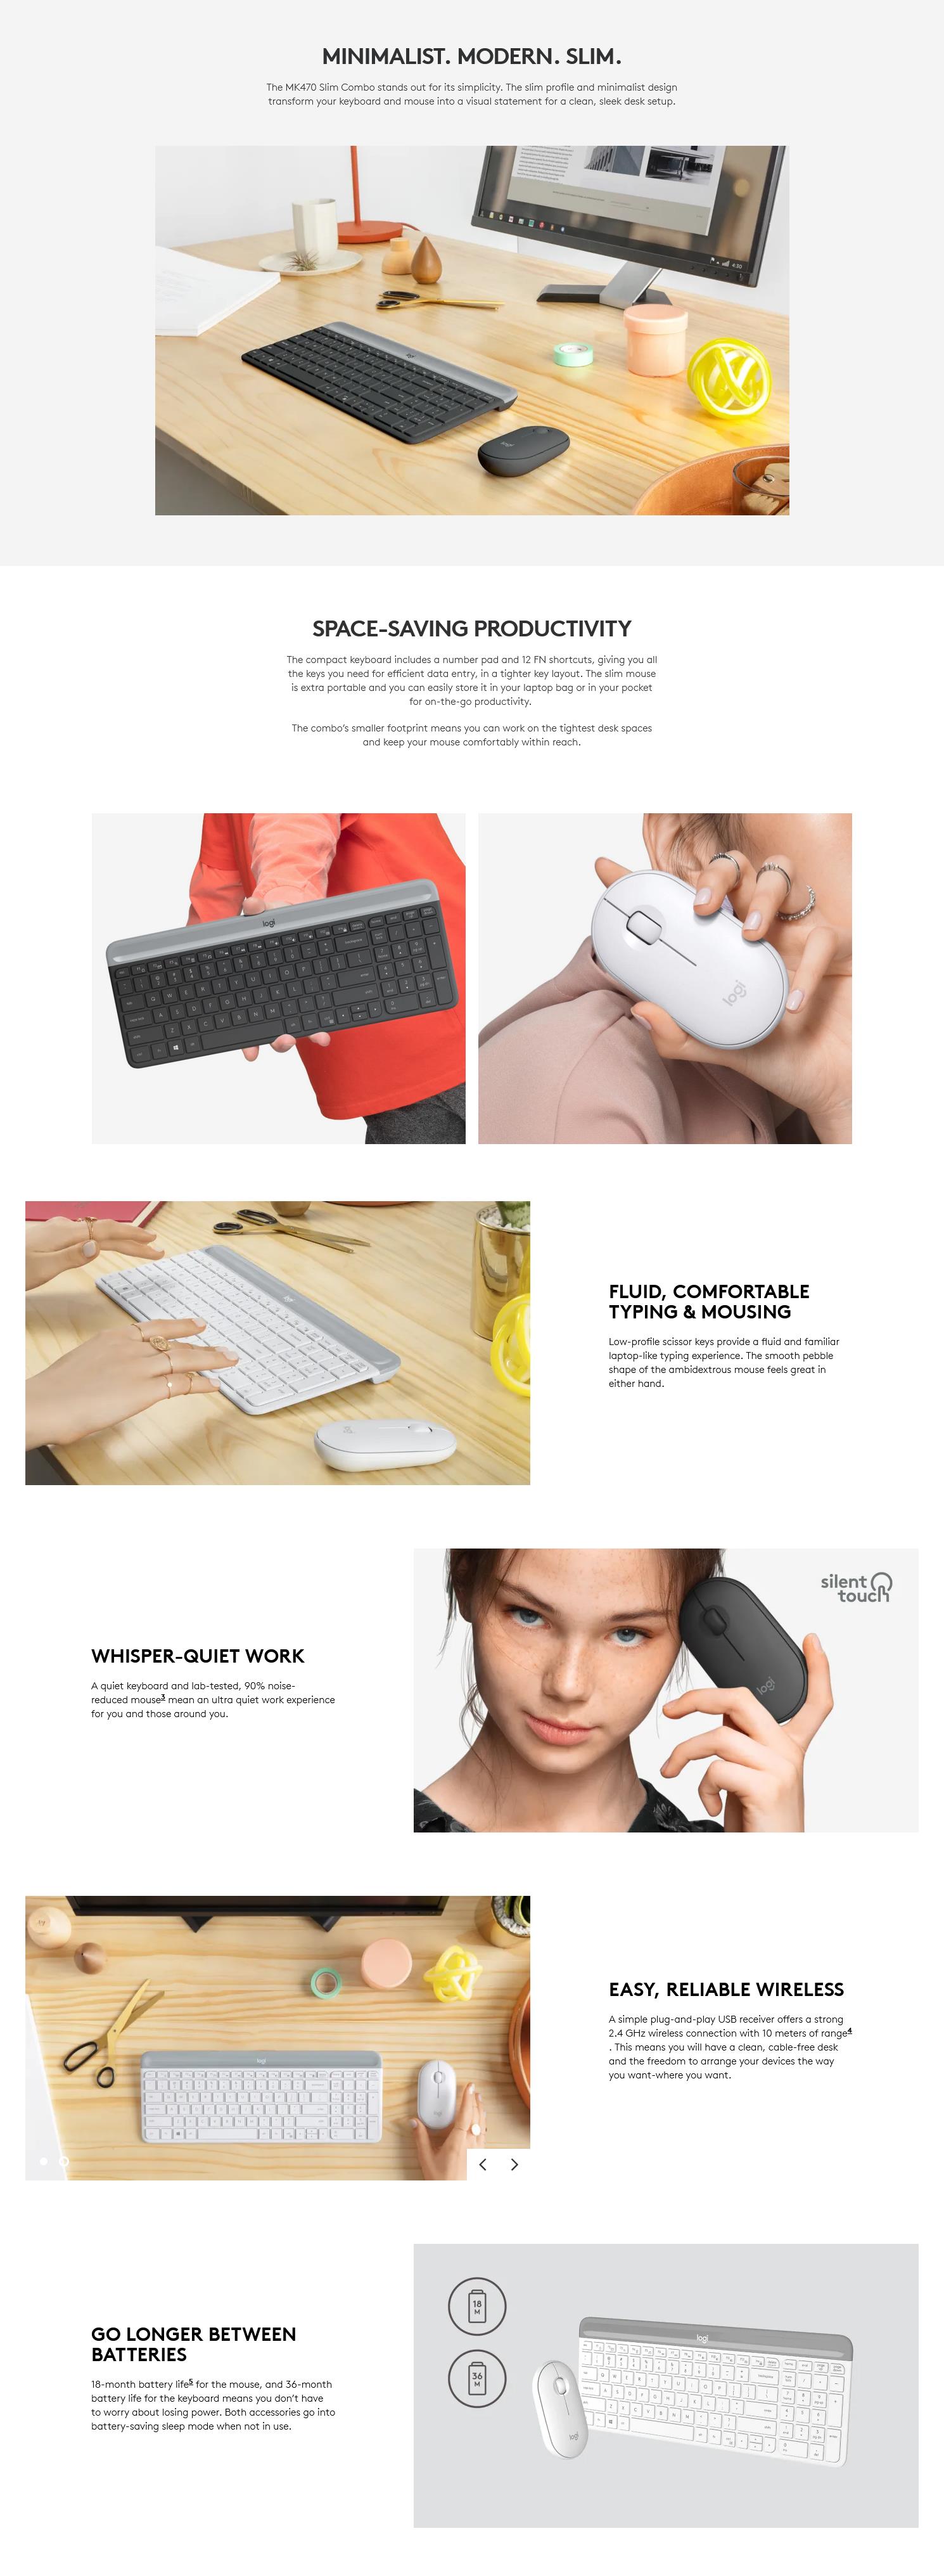 A large marketing image providing additional information about the product Logitech MK470 Slim Wireless Keyboard and Mouse Combo - Graphite - Additional alt info not provided